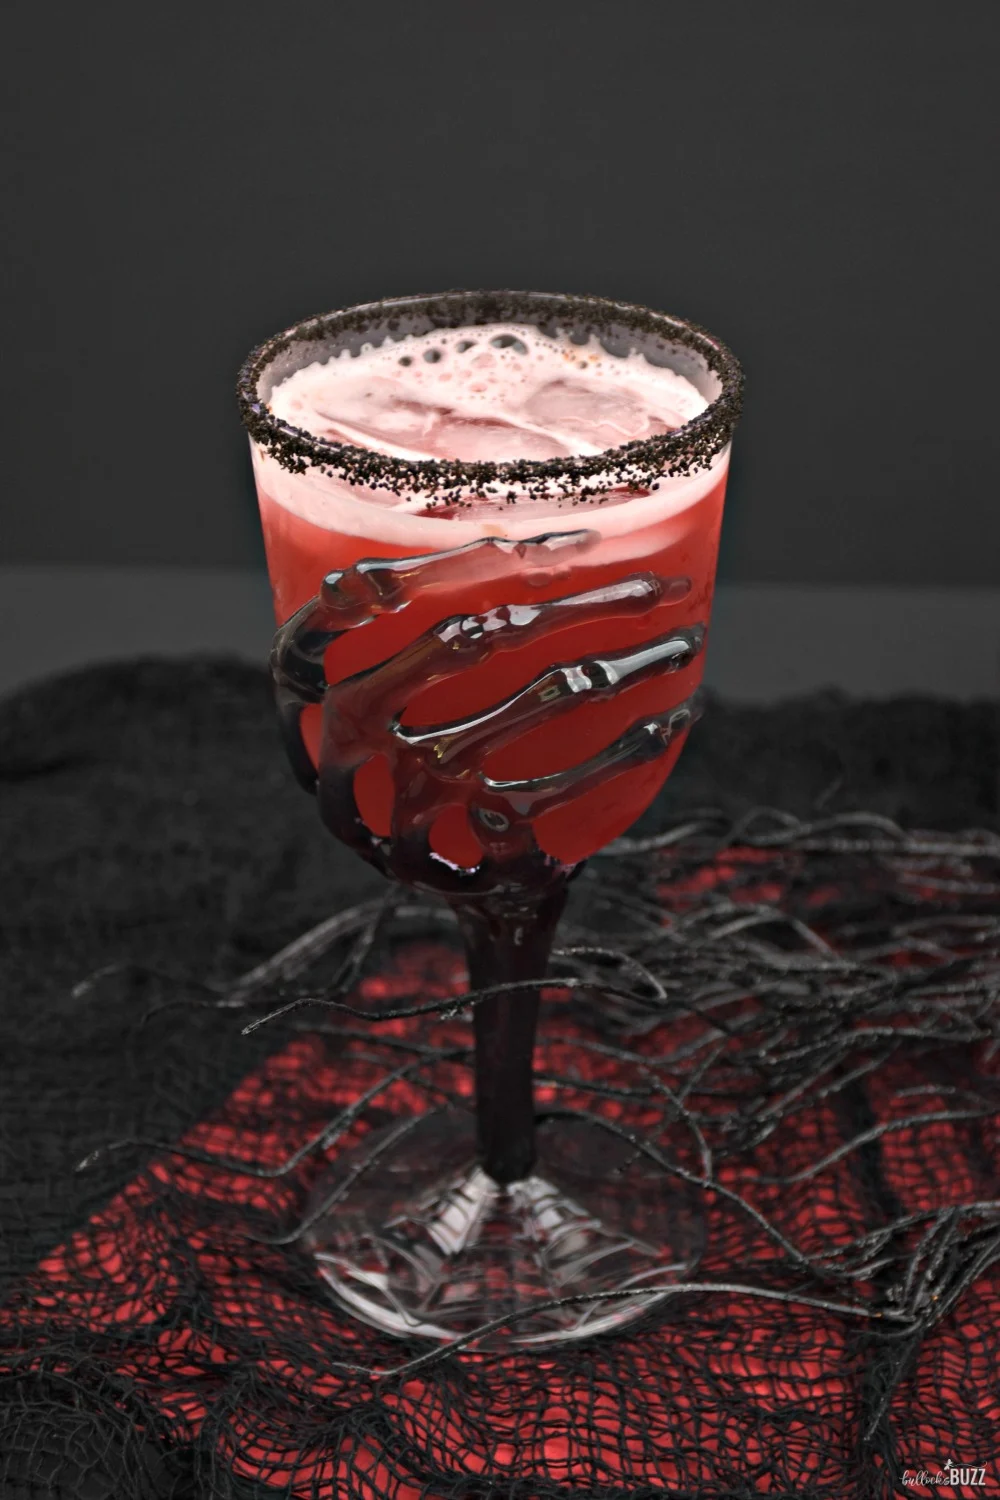 The Vampire's Kiss Halloween cocktail is sure to please both mortals and vampires alike with its fruity taste and spooktacular color!